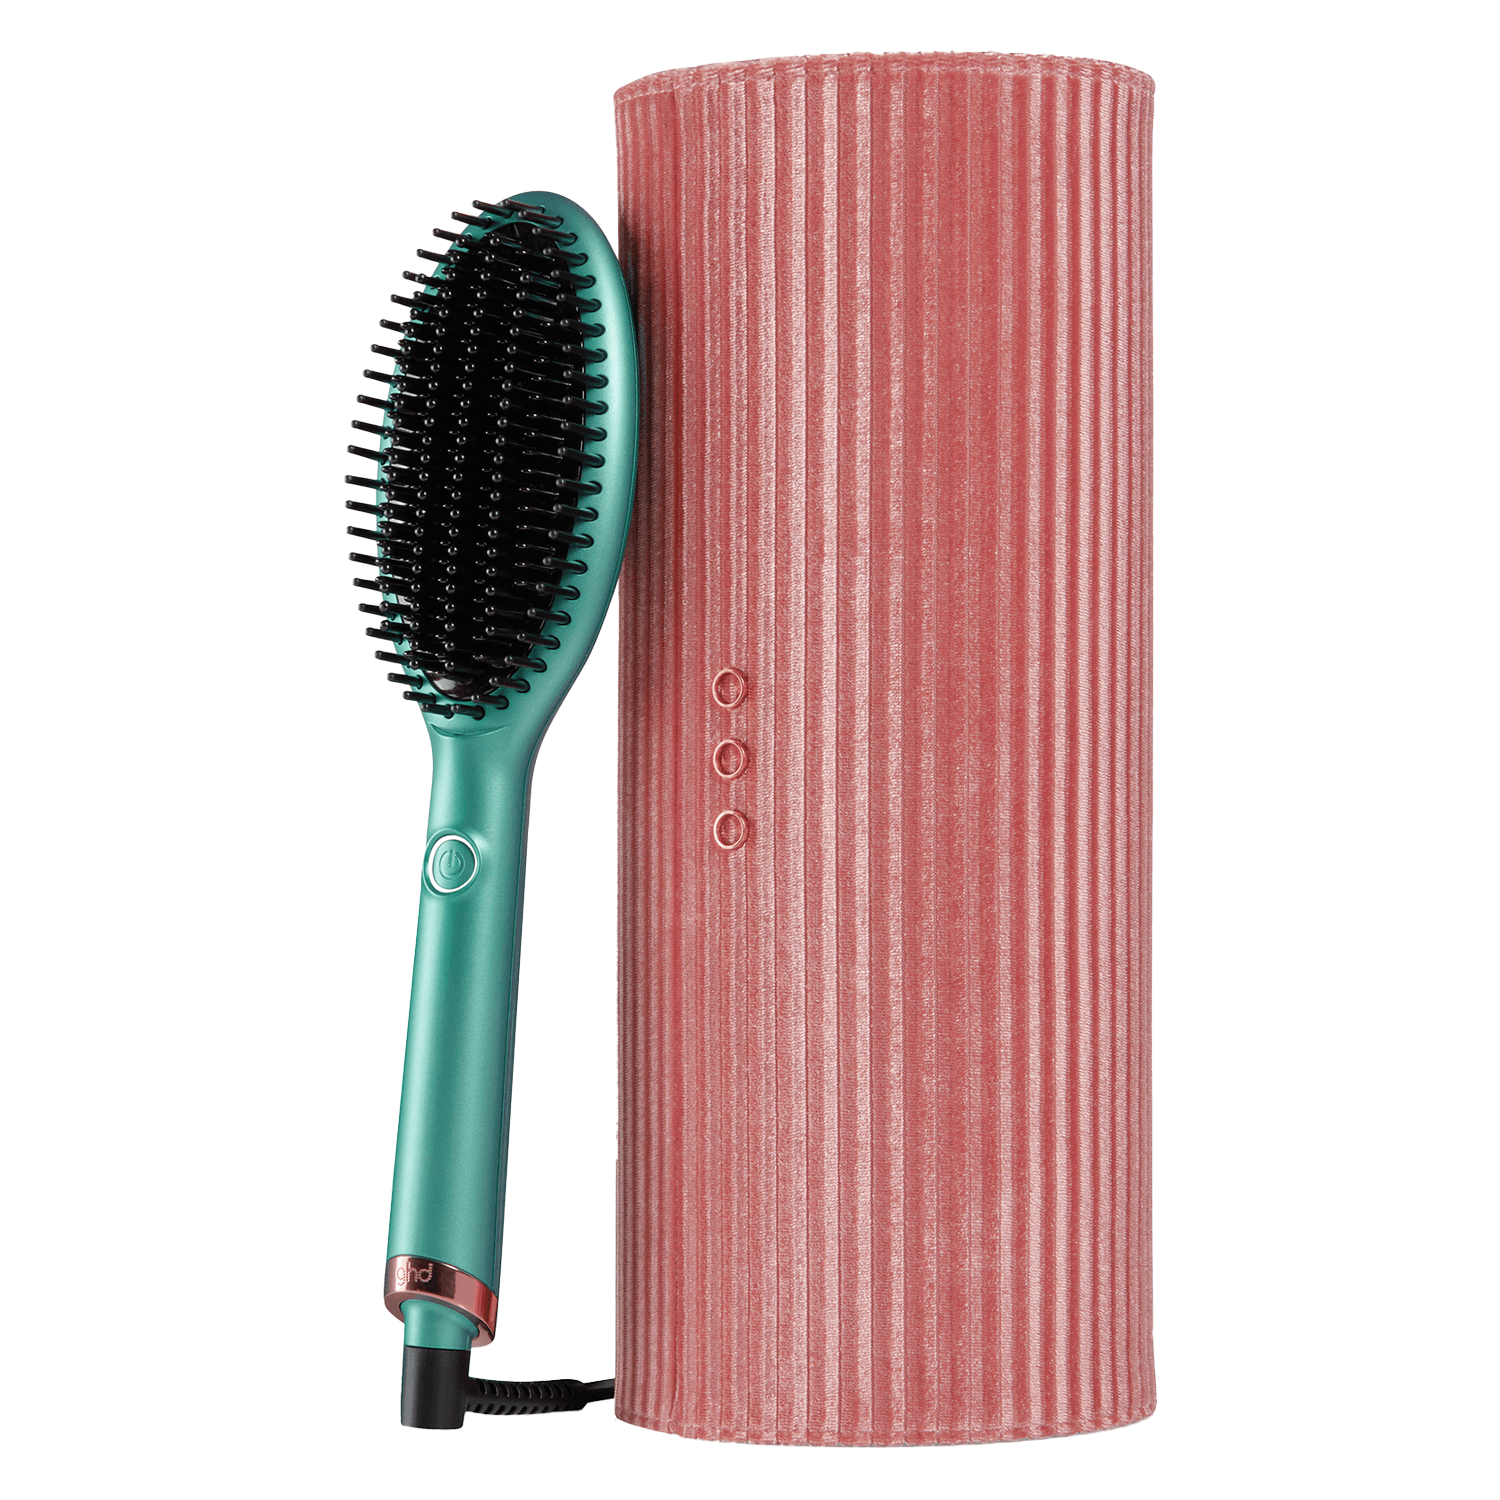 ghd tools - Dreamland Collection  Le Glide